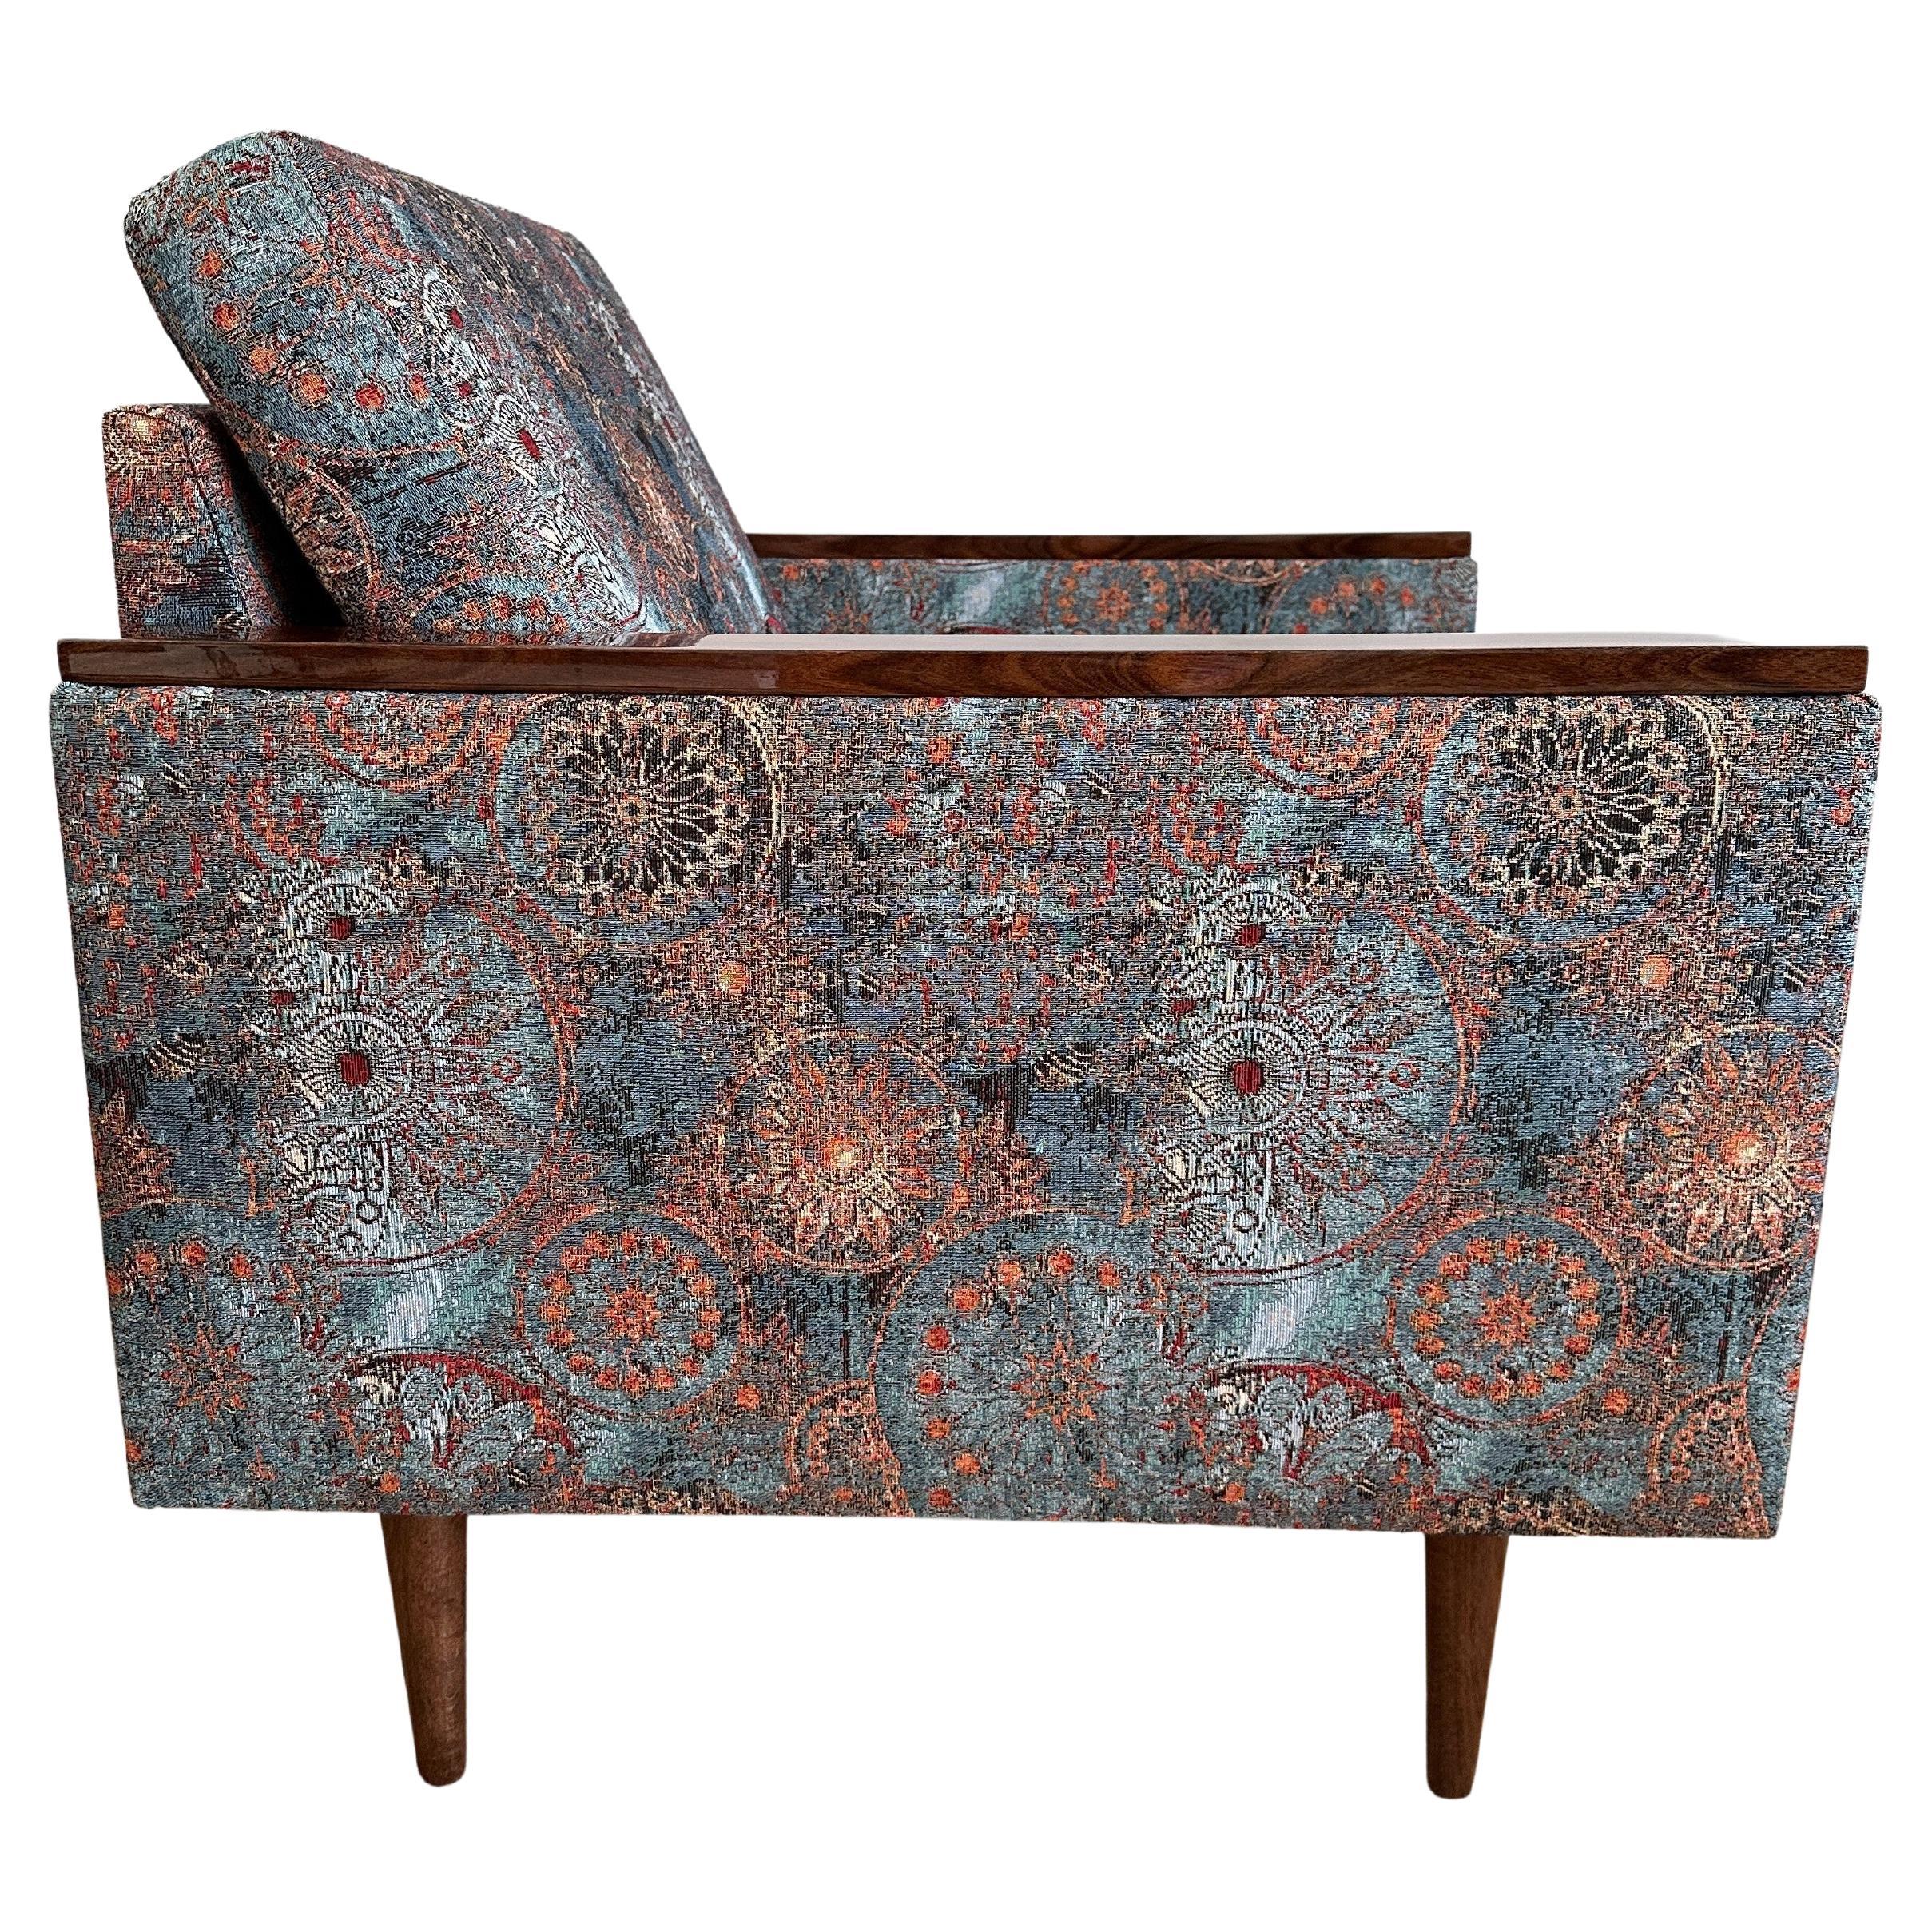 Midcentury Geometric Armchair with Ethnic Pattern, Europe, 1970s